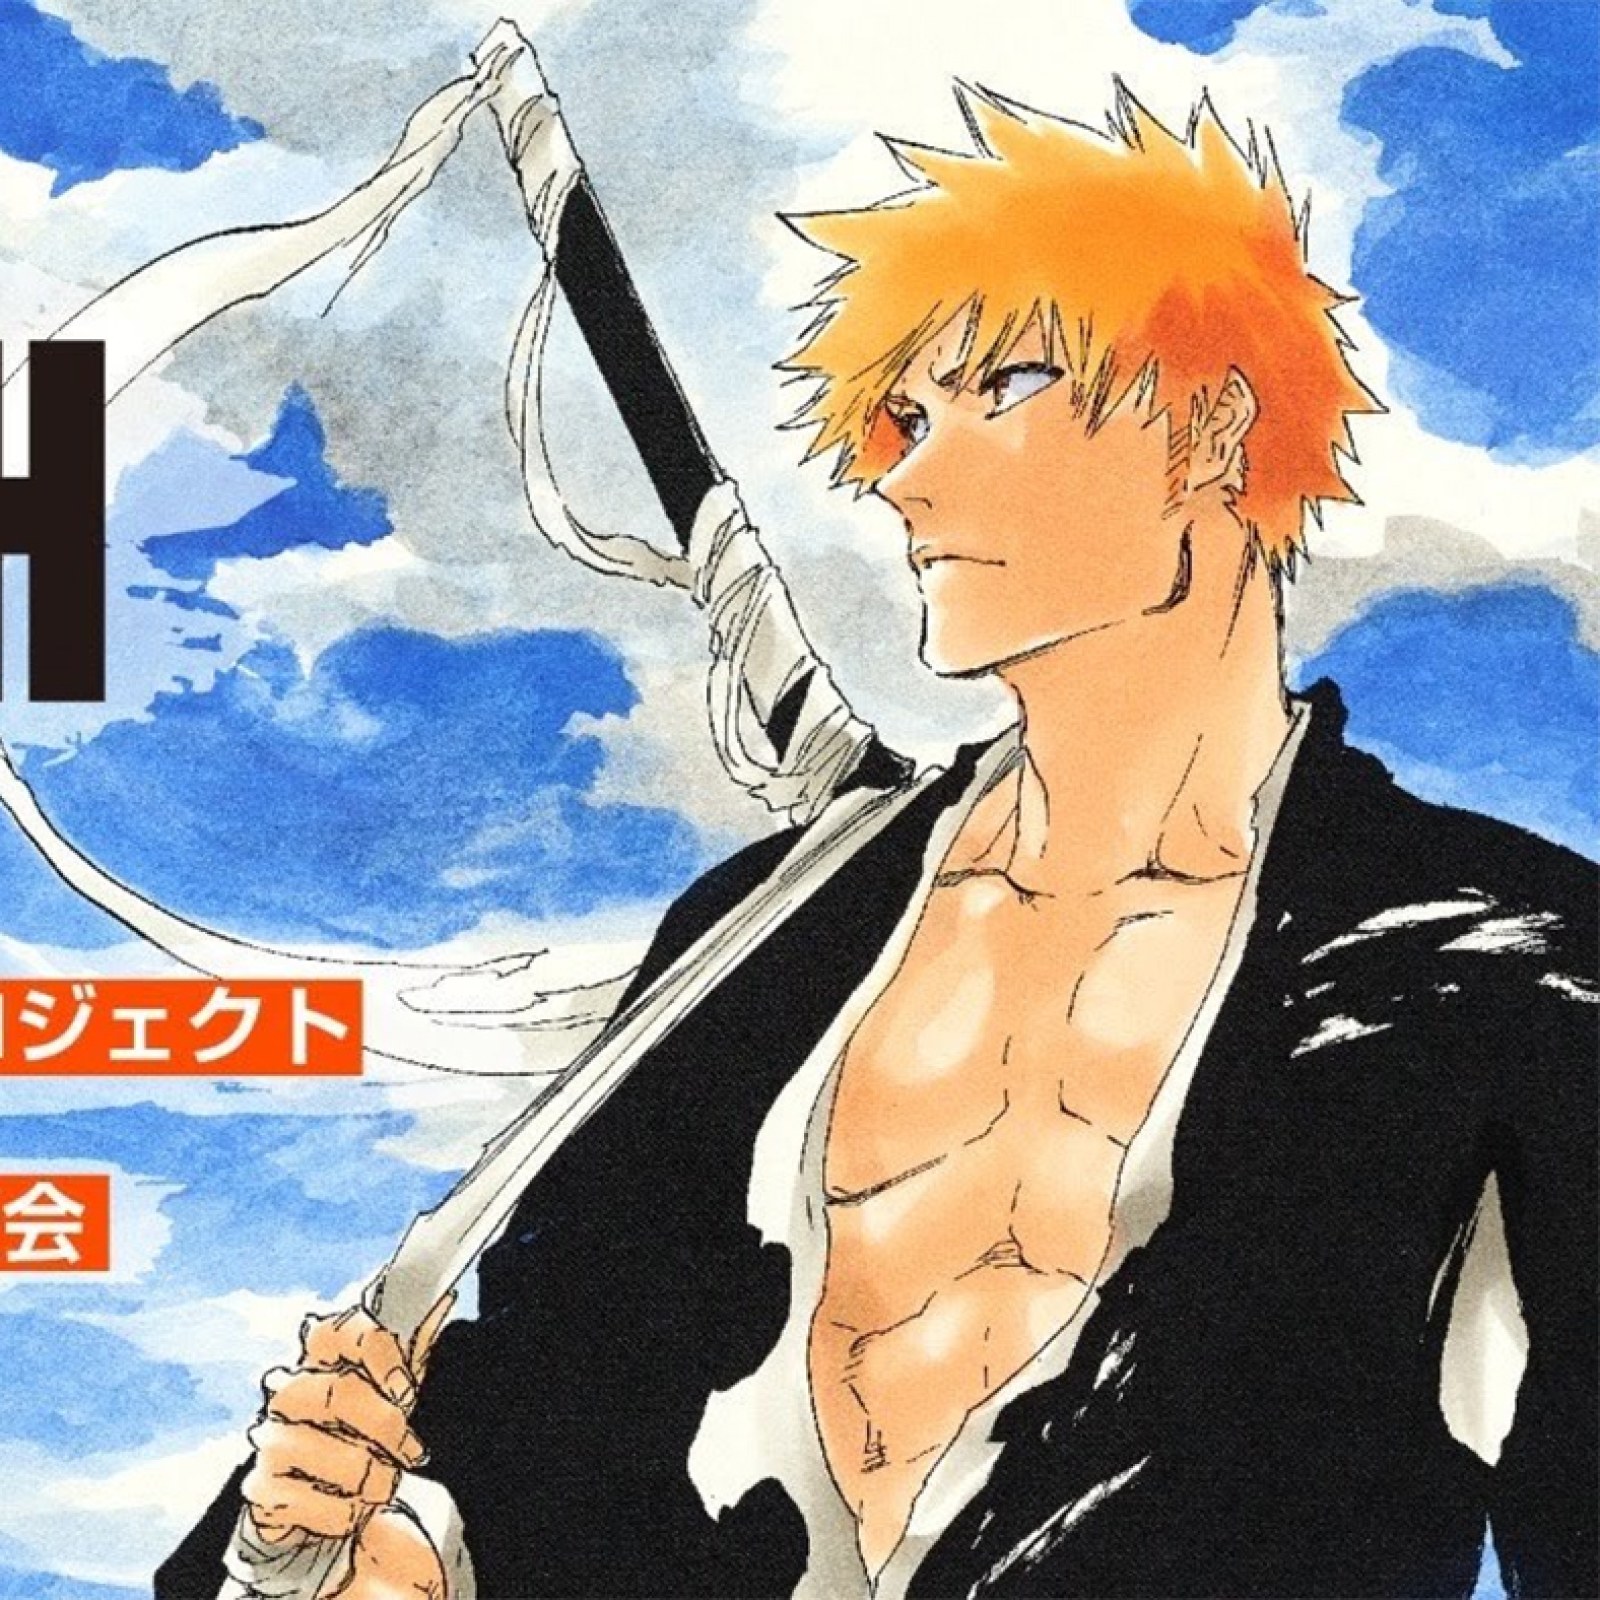 Bleach Anime To Return In 21 Burn The Witch Gets Serialization And Anime